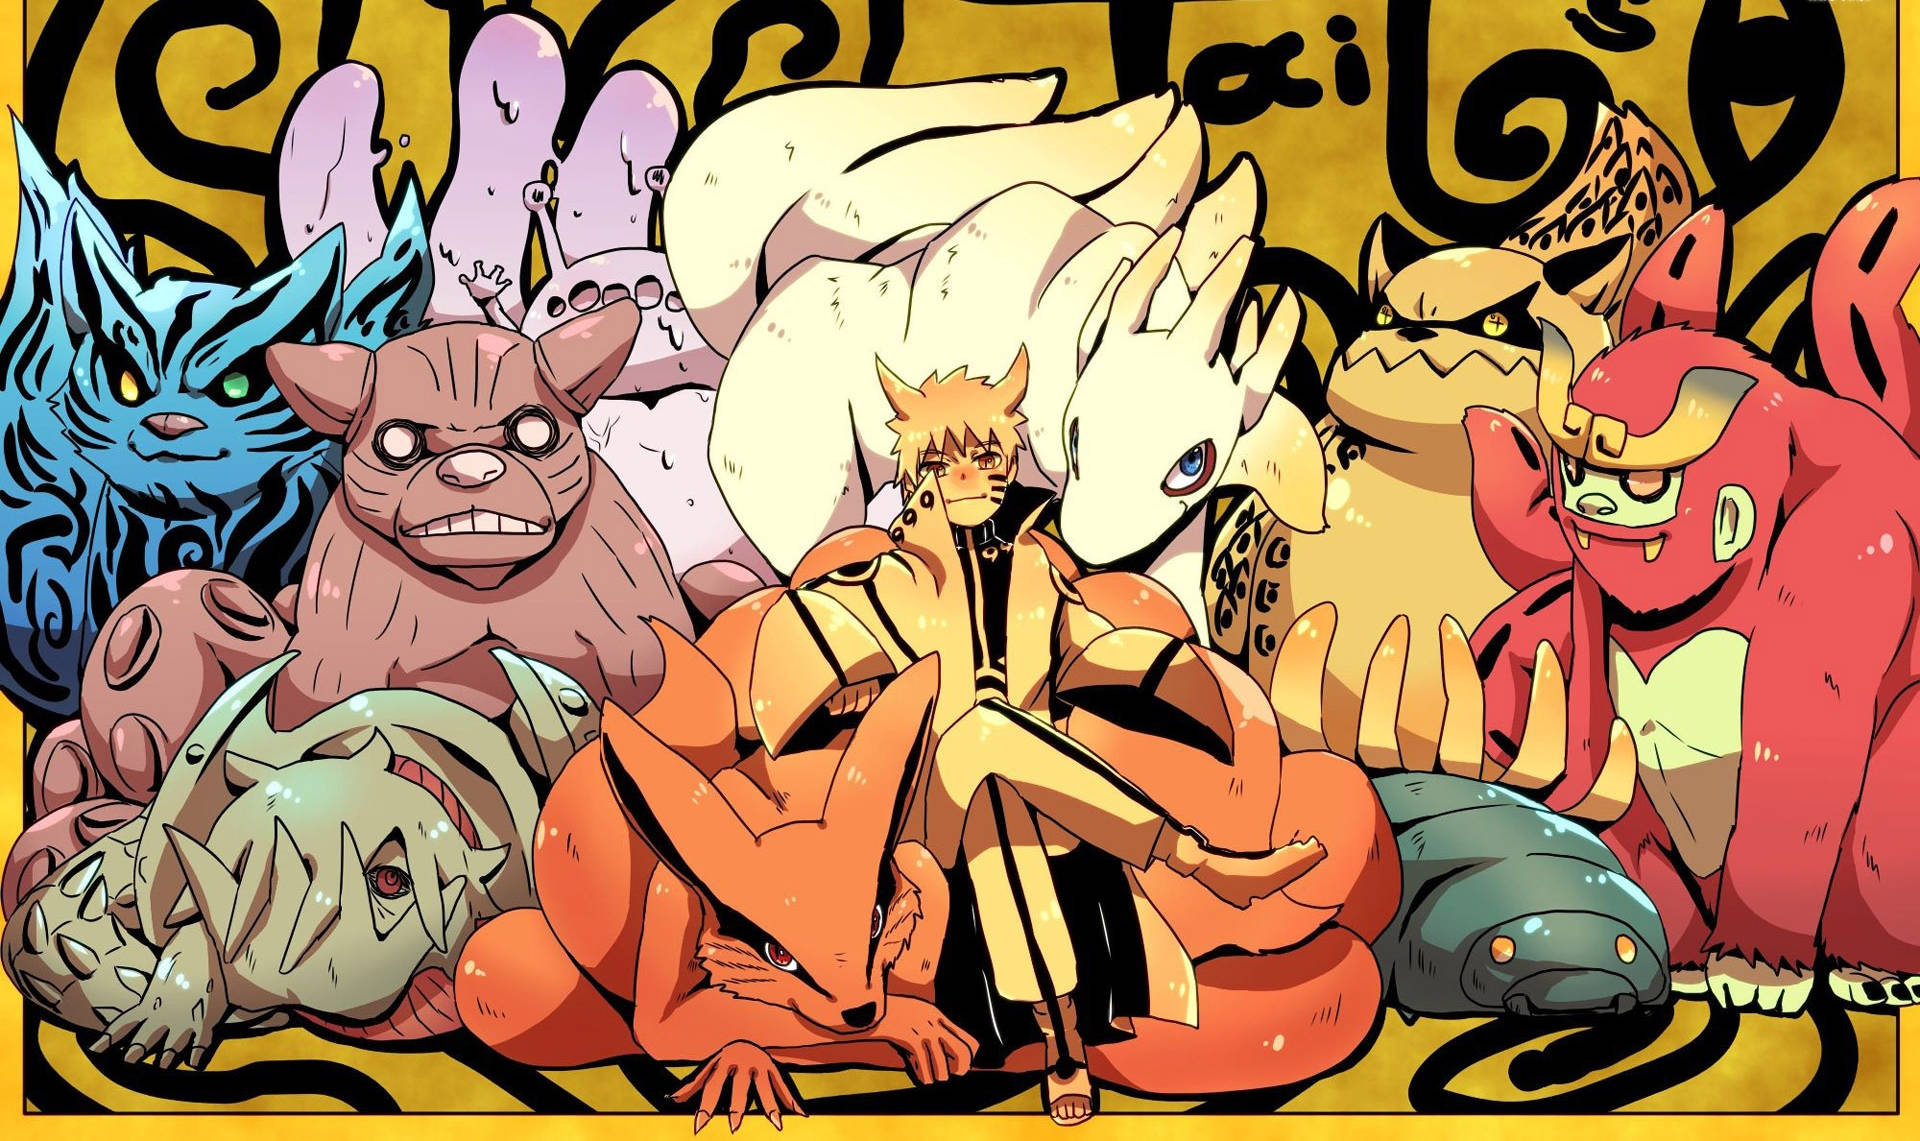 Anime Naruto in hokage posters & prints by Cat Pop Art